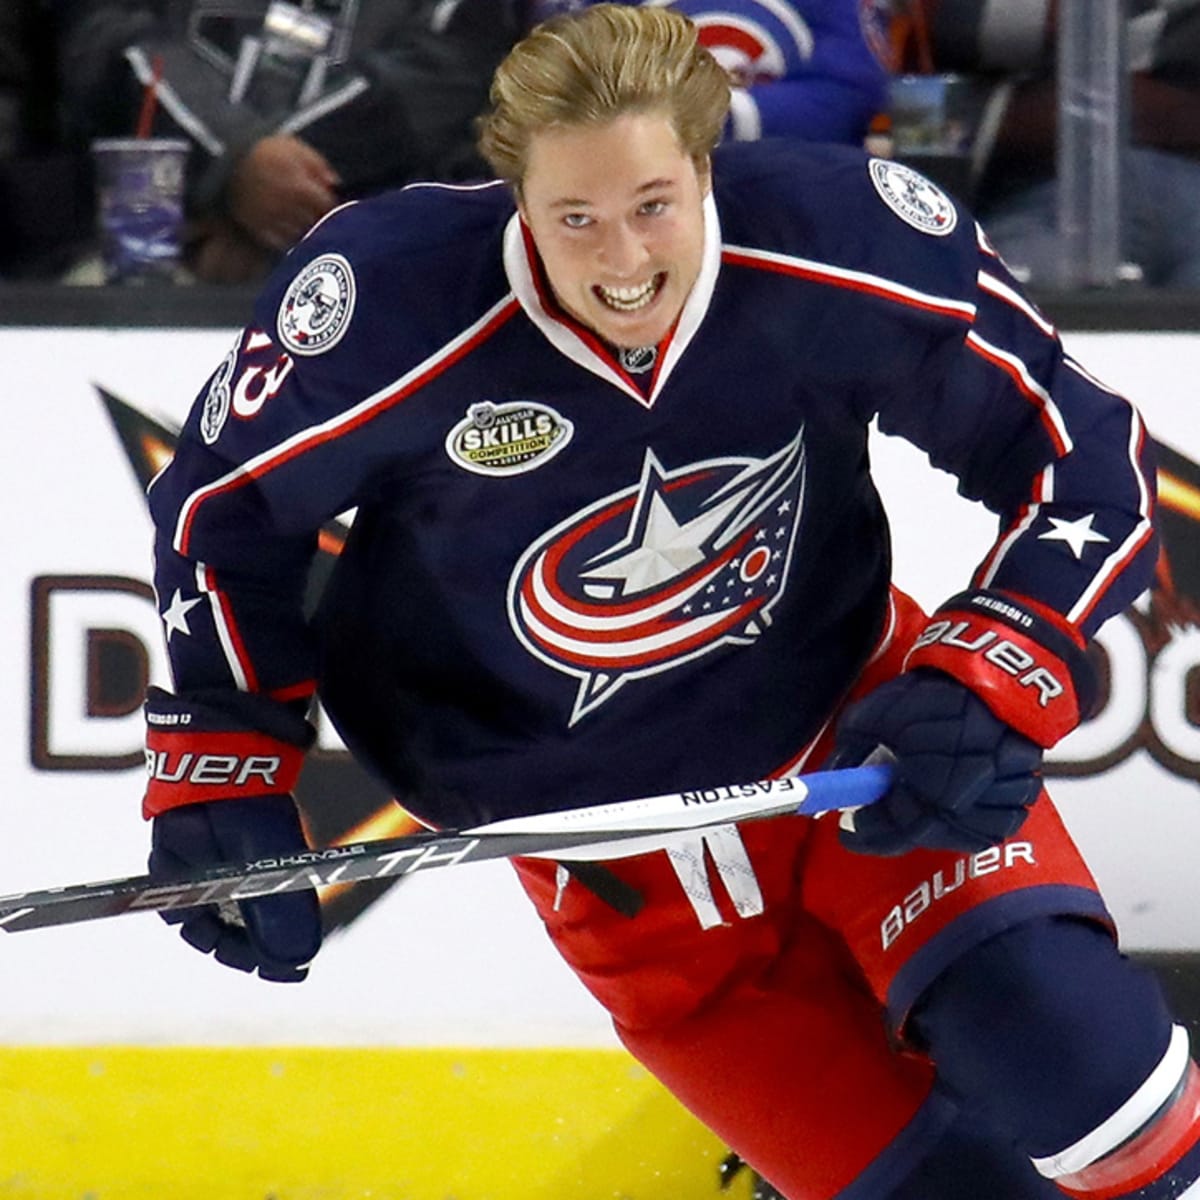 Introducing Cam Atkinson: The hottest scorer on the NHL's hottest